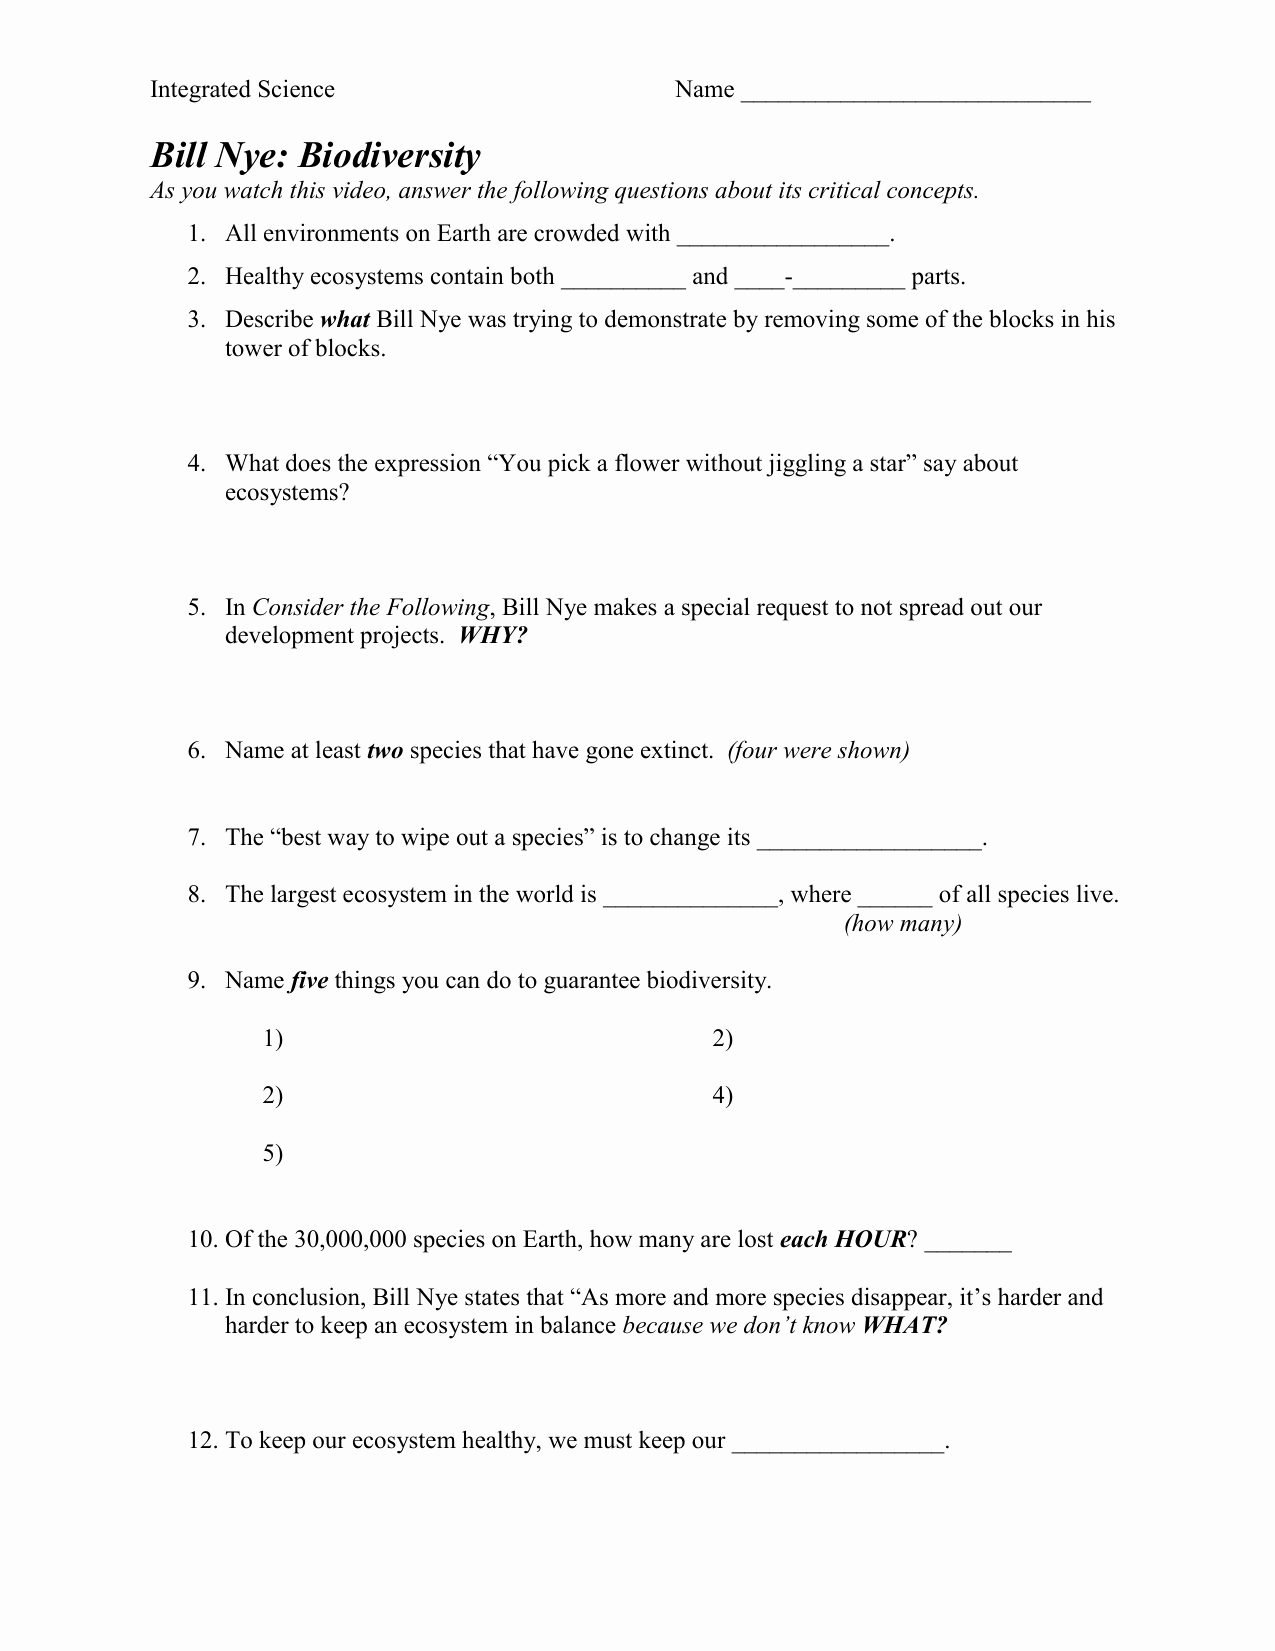 Bill Nye Food Web Worksheet Awesome Tuesdays with Morrie Worksheets